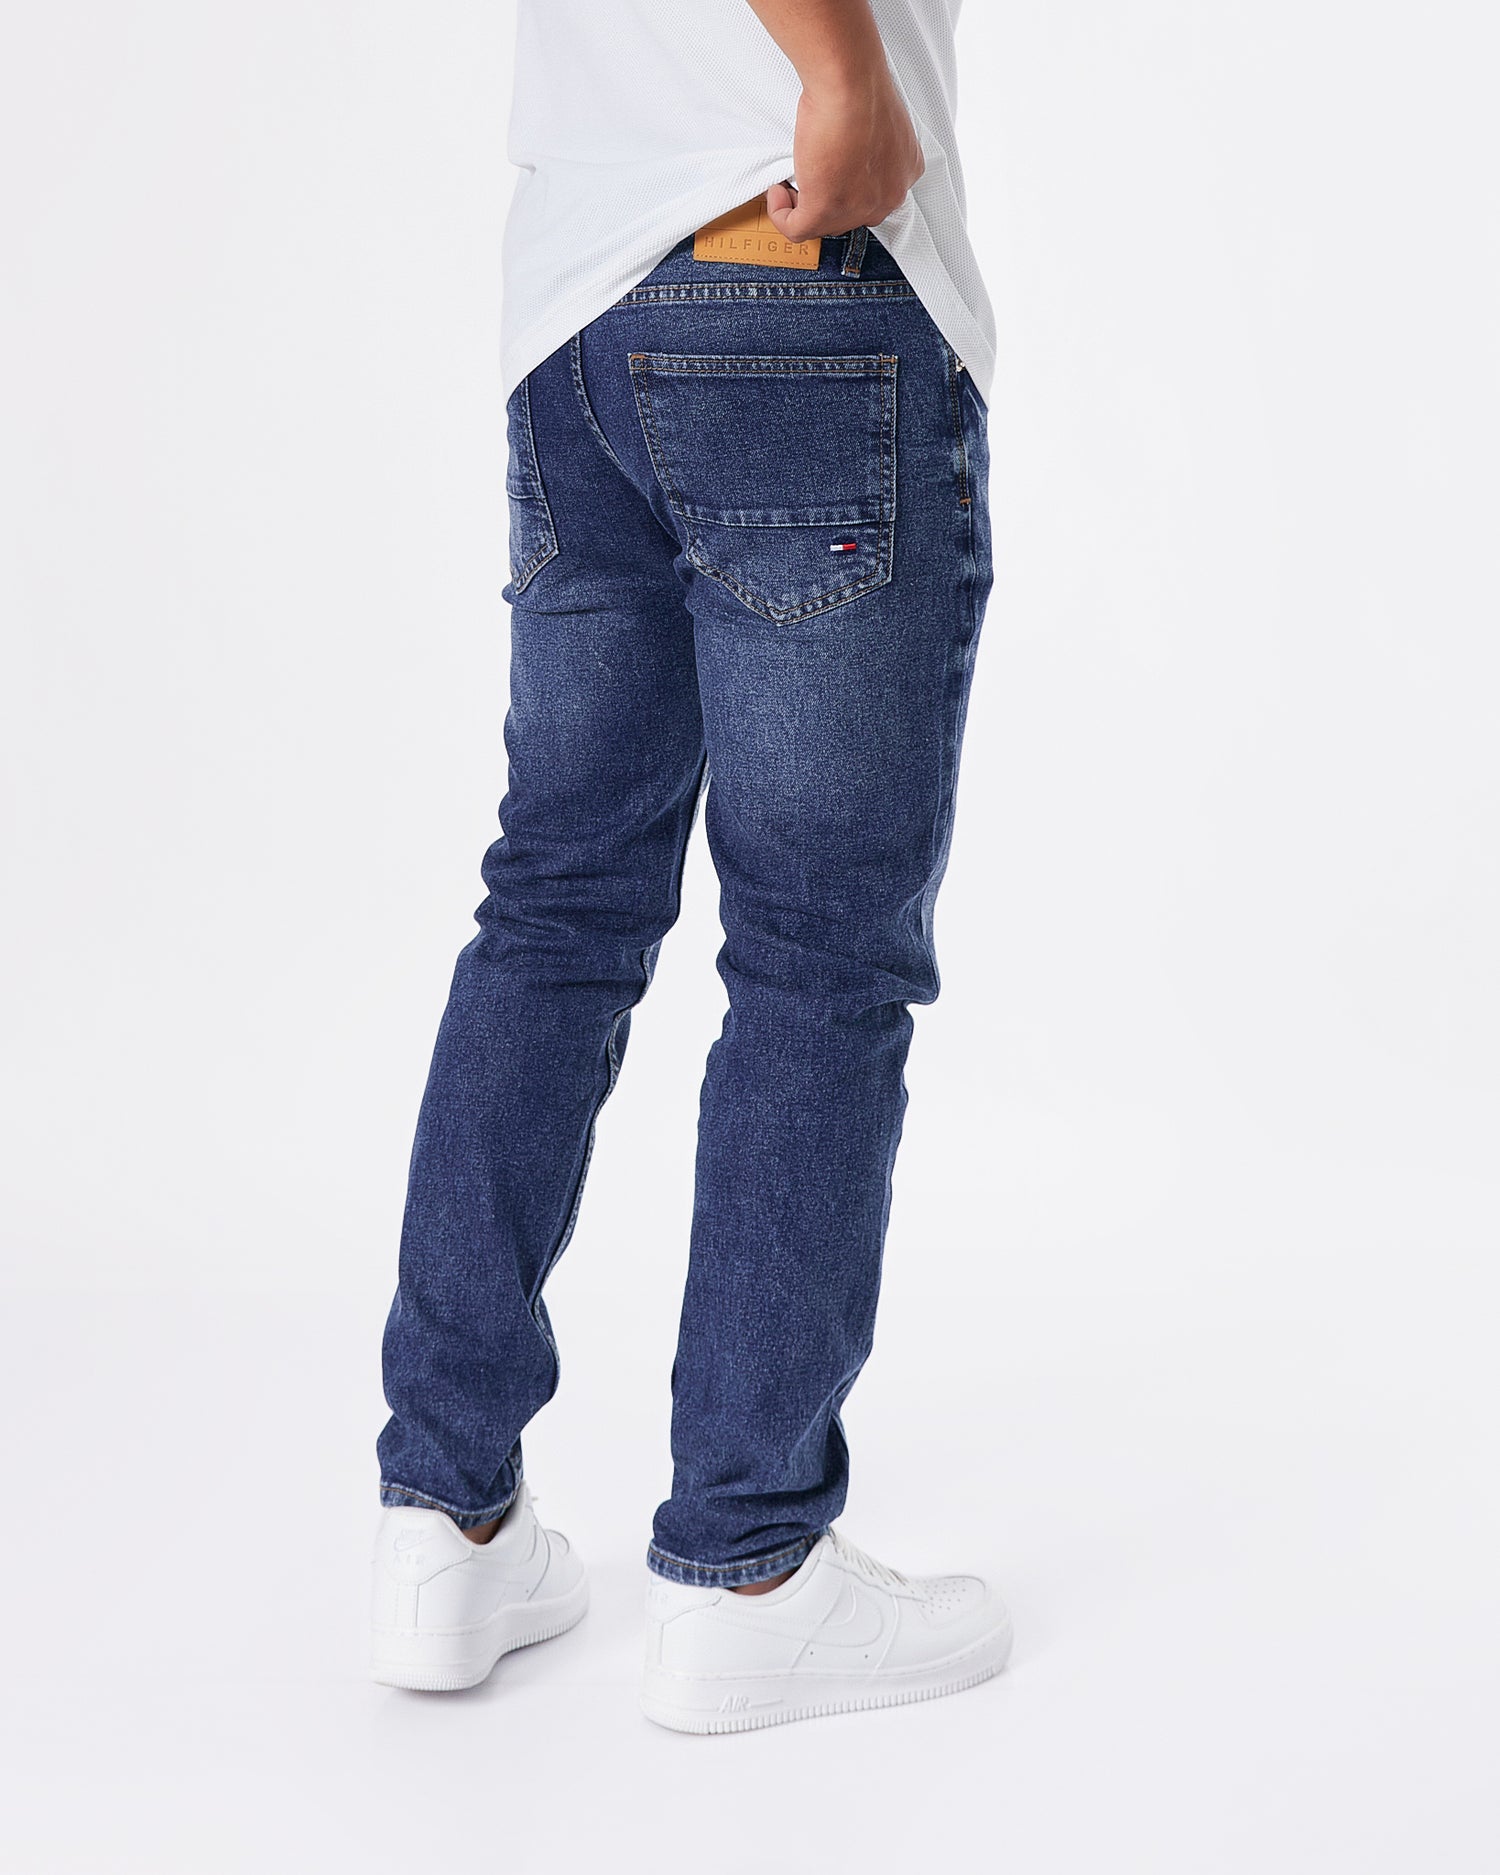 TH Flag Embroidered Men Distressed Blue Slim Fit Jeans 25.90